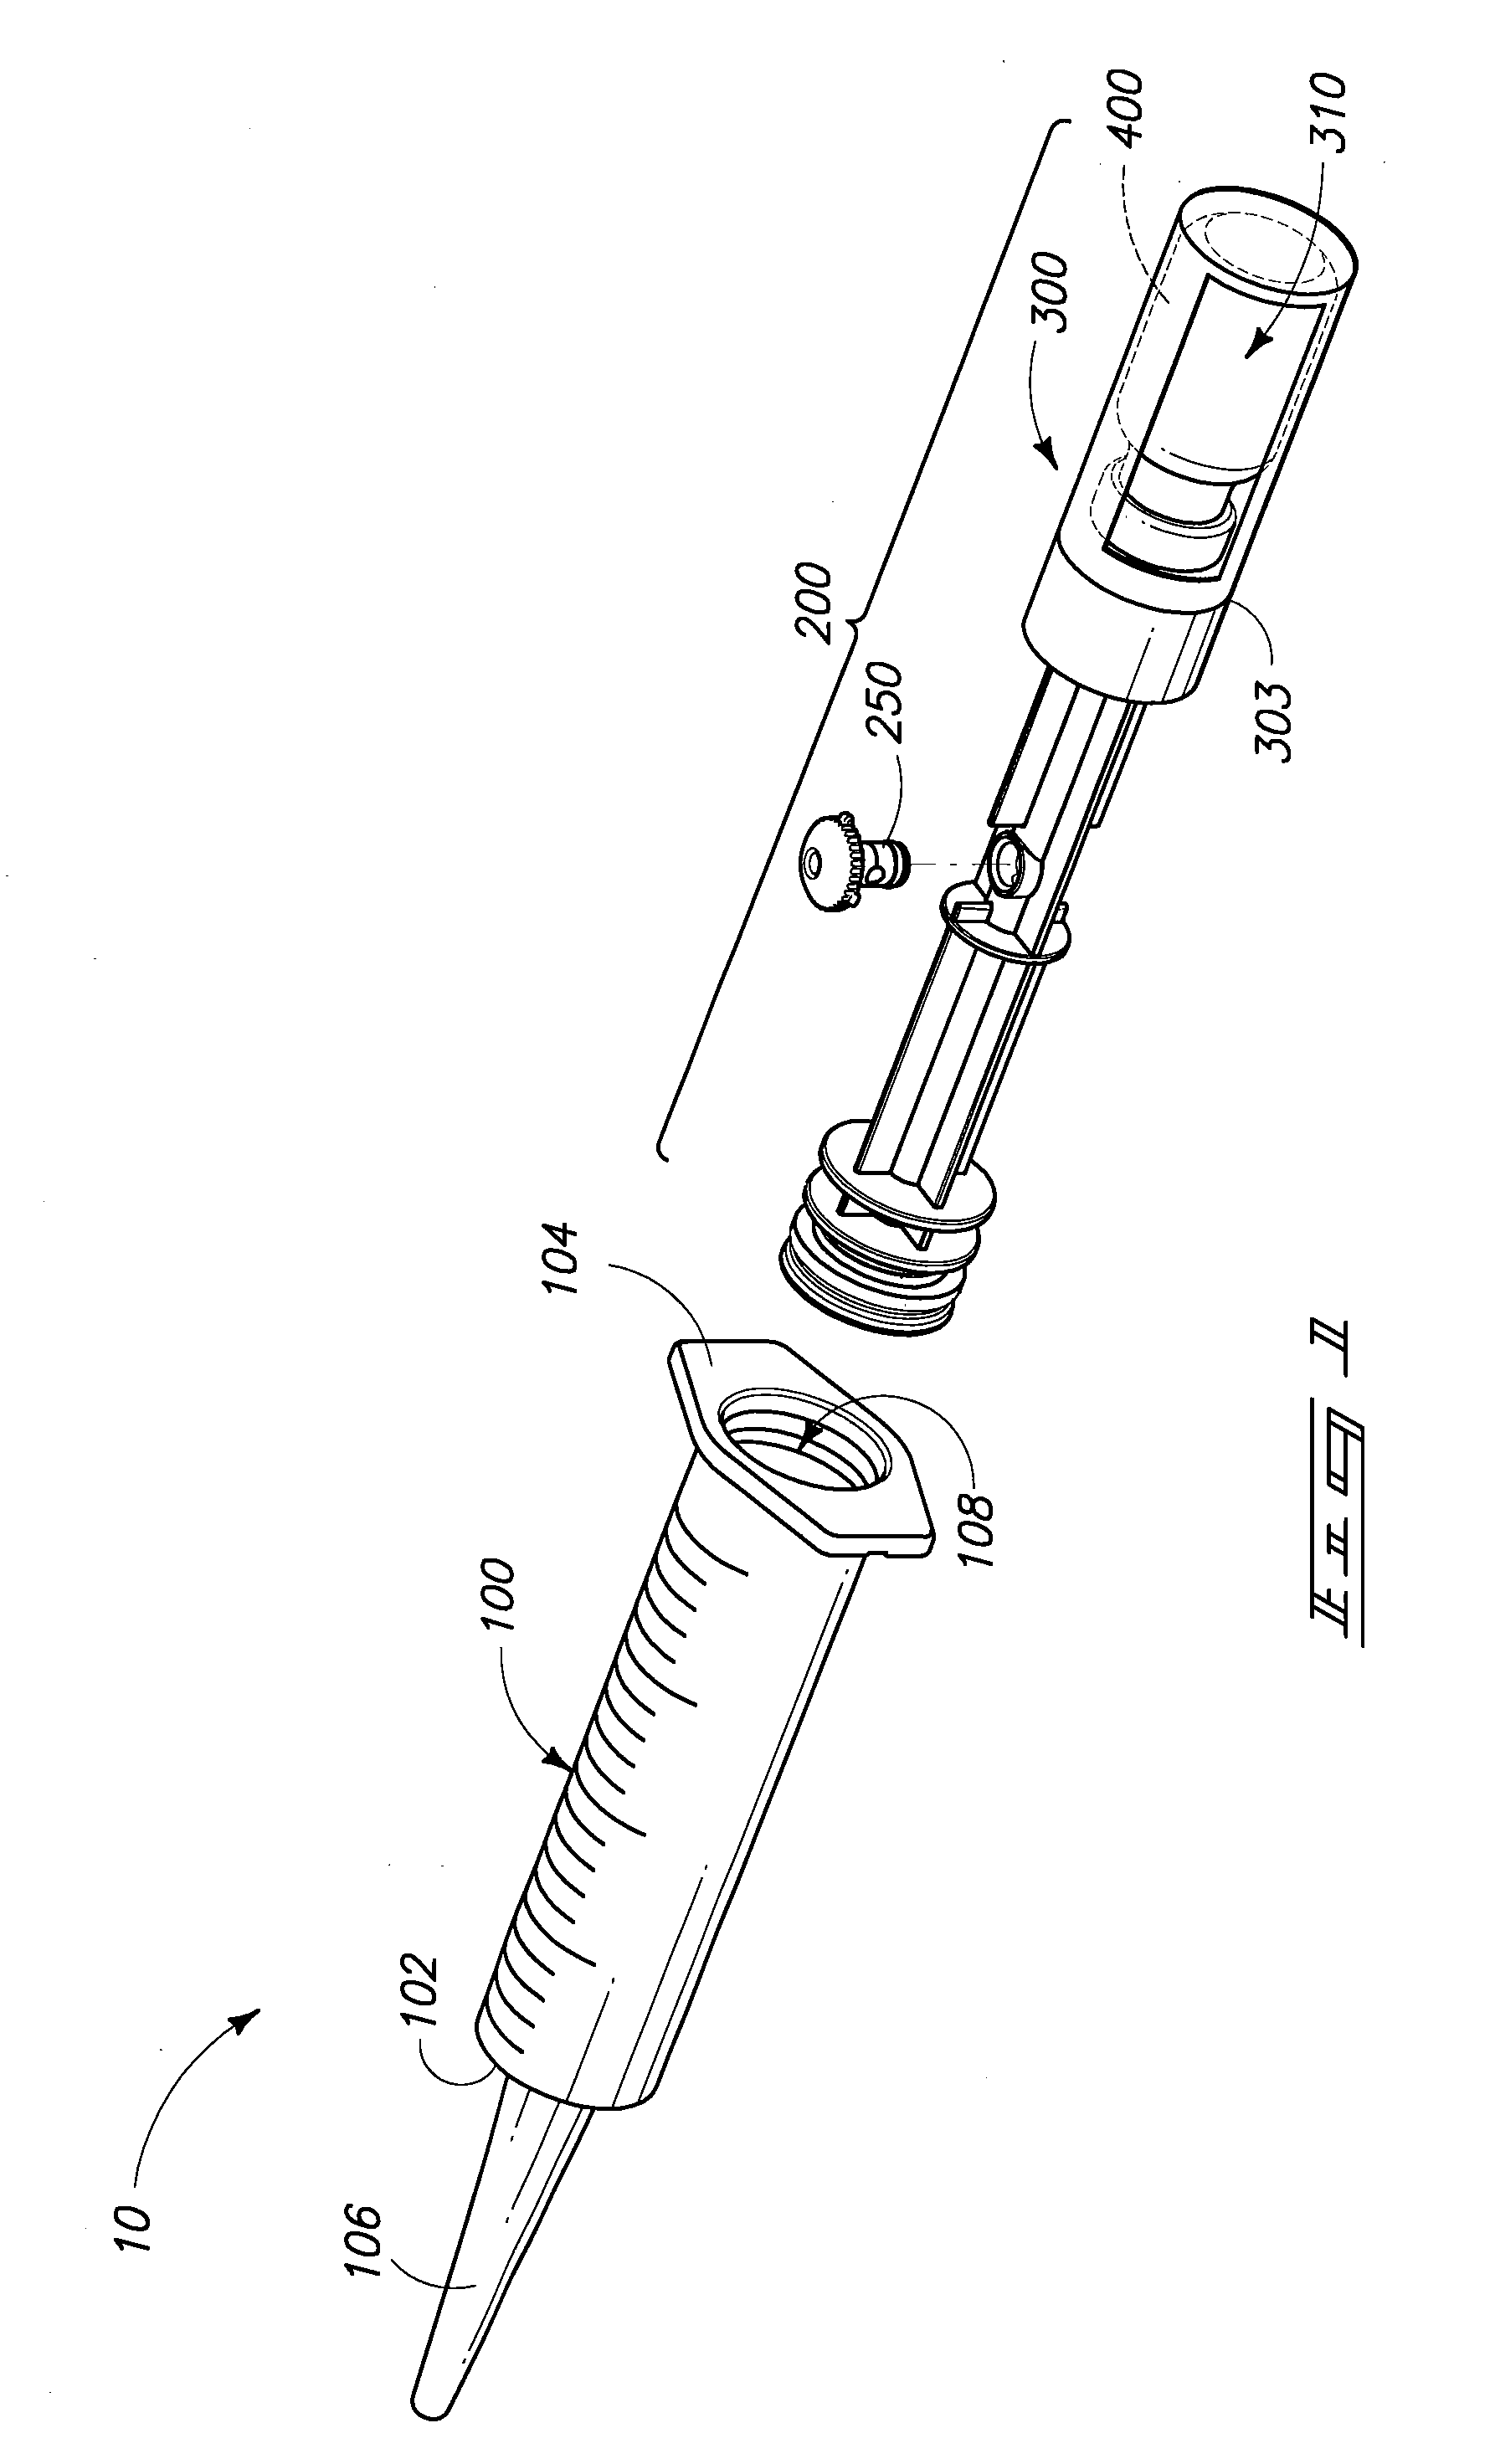 Mixing/Administration Syringe Devices, Protective Packaging and Methods of Protecting Syringe Handlers